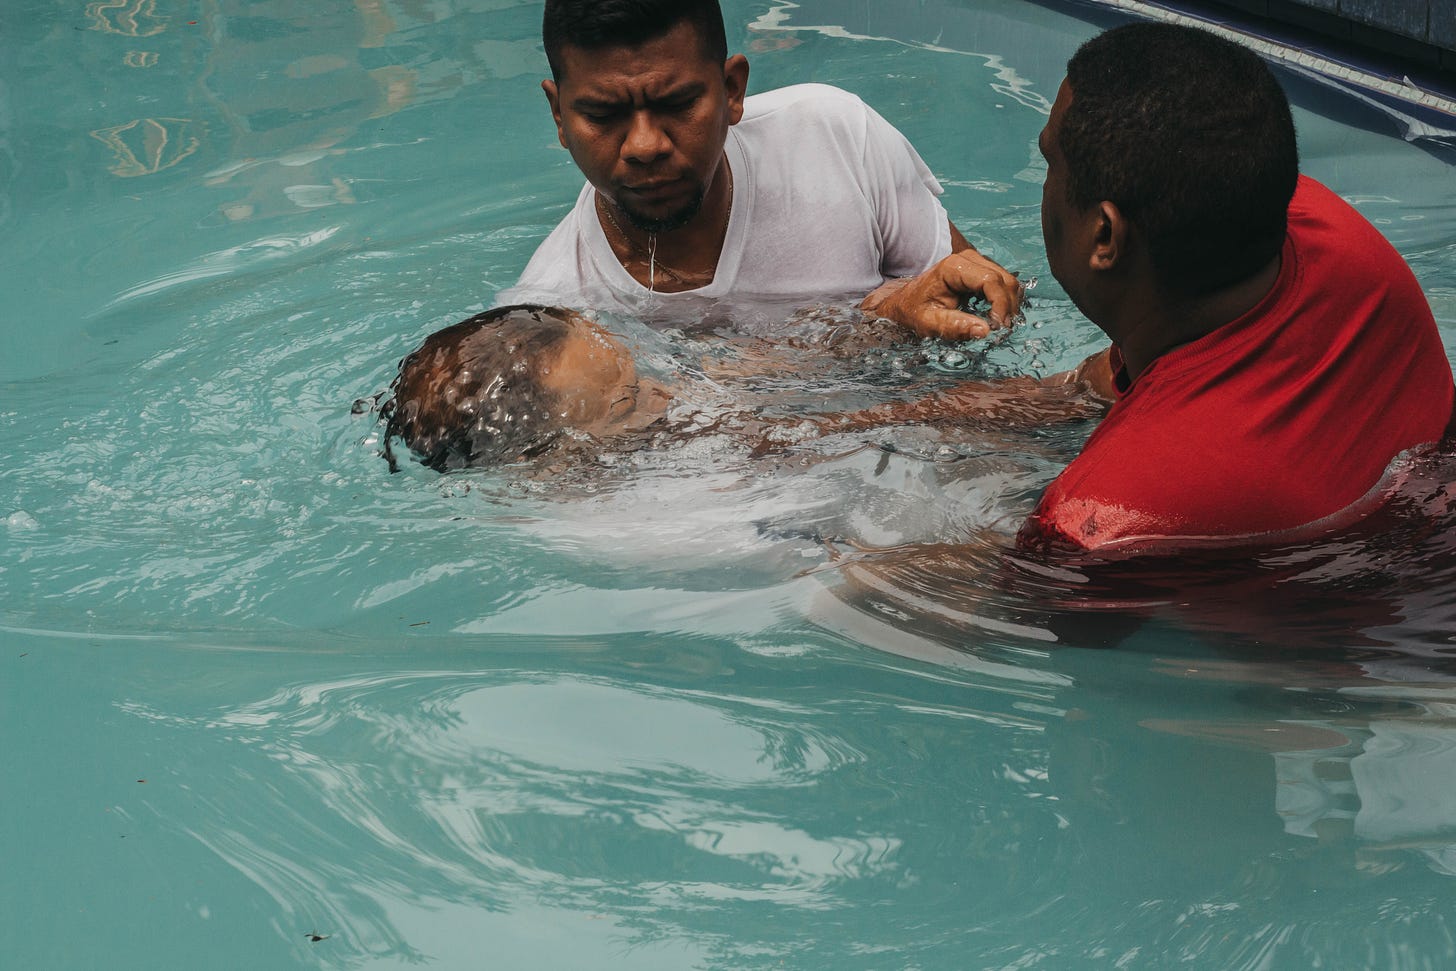 A person being baptized in a pool by two men.